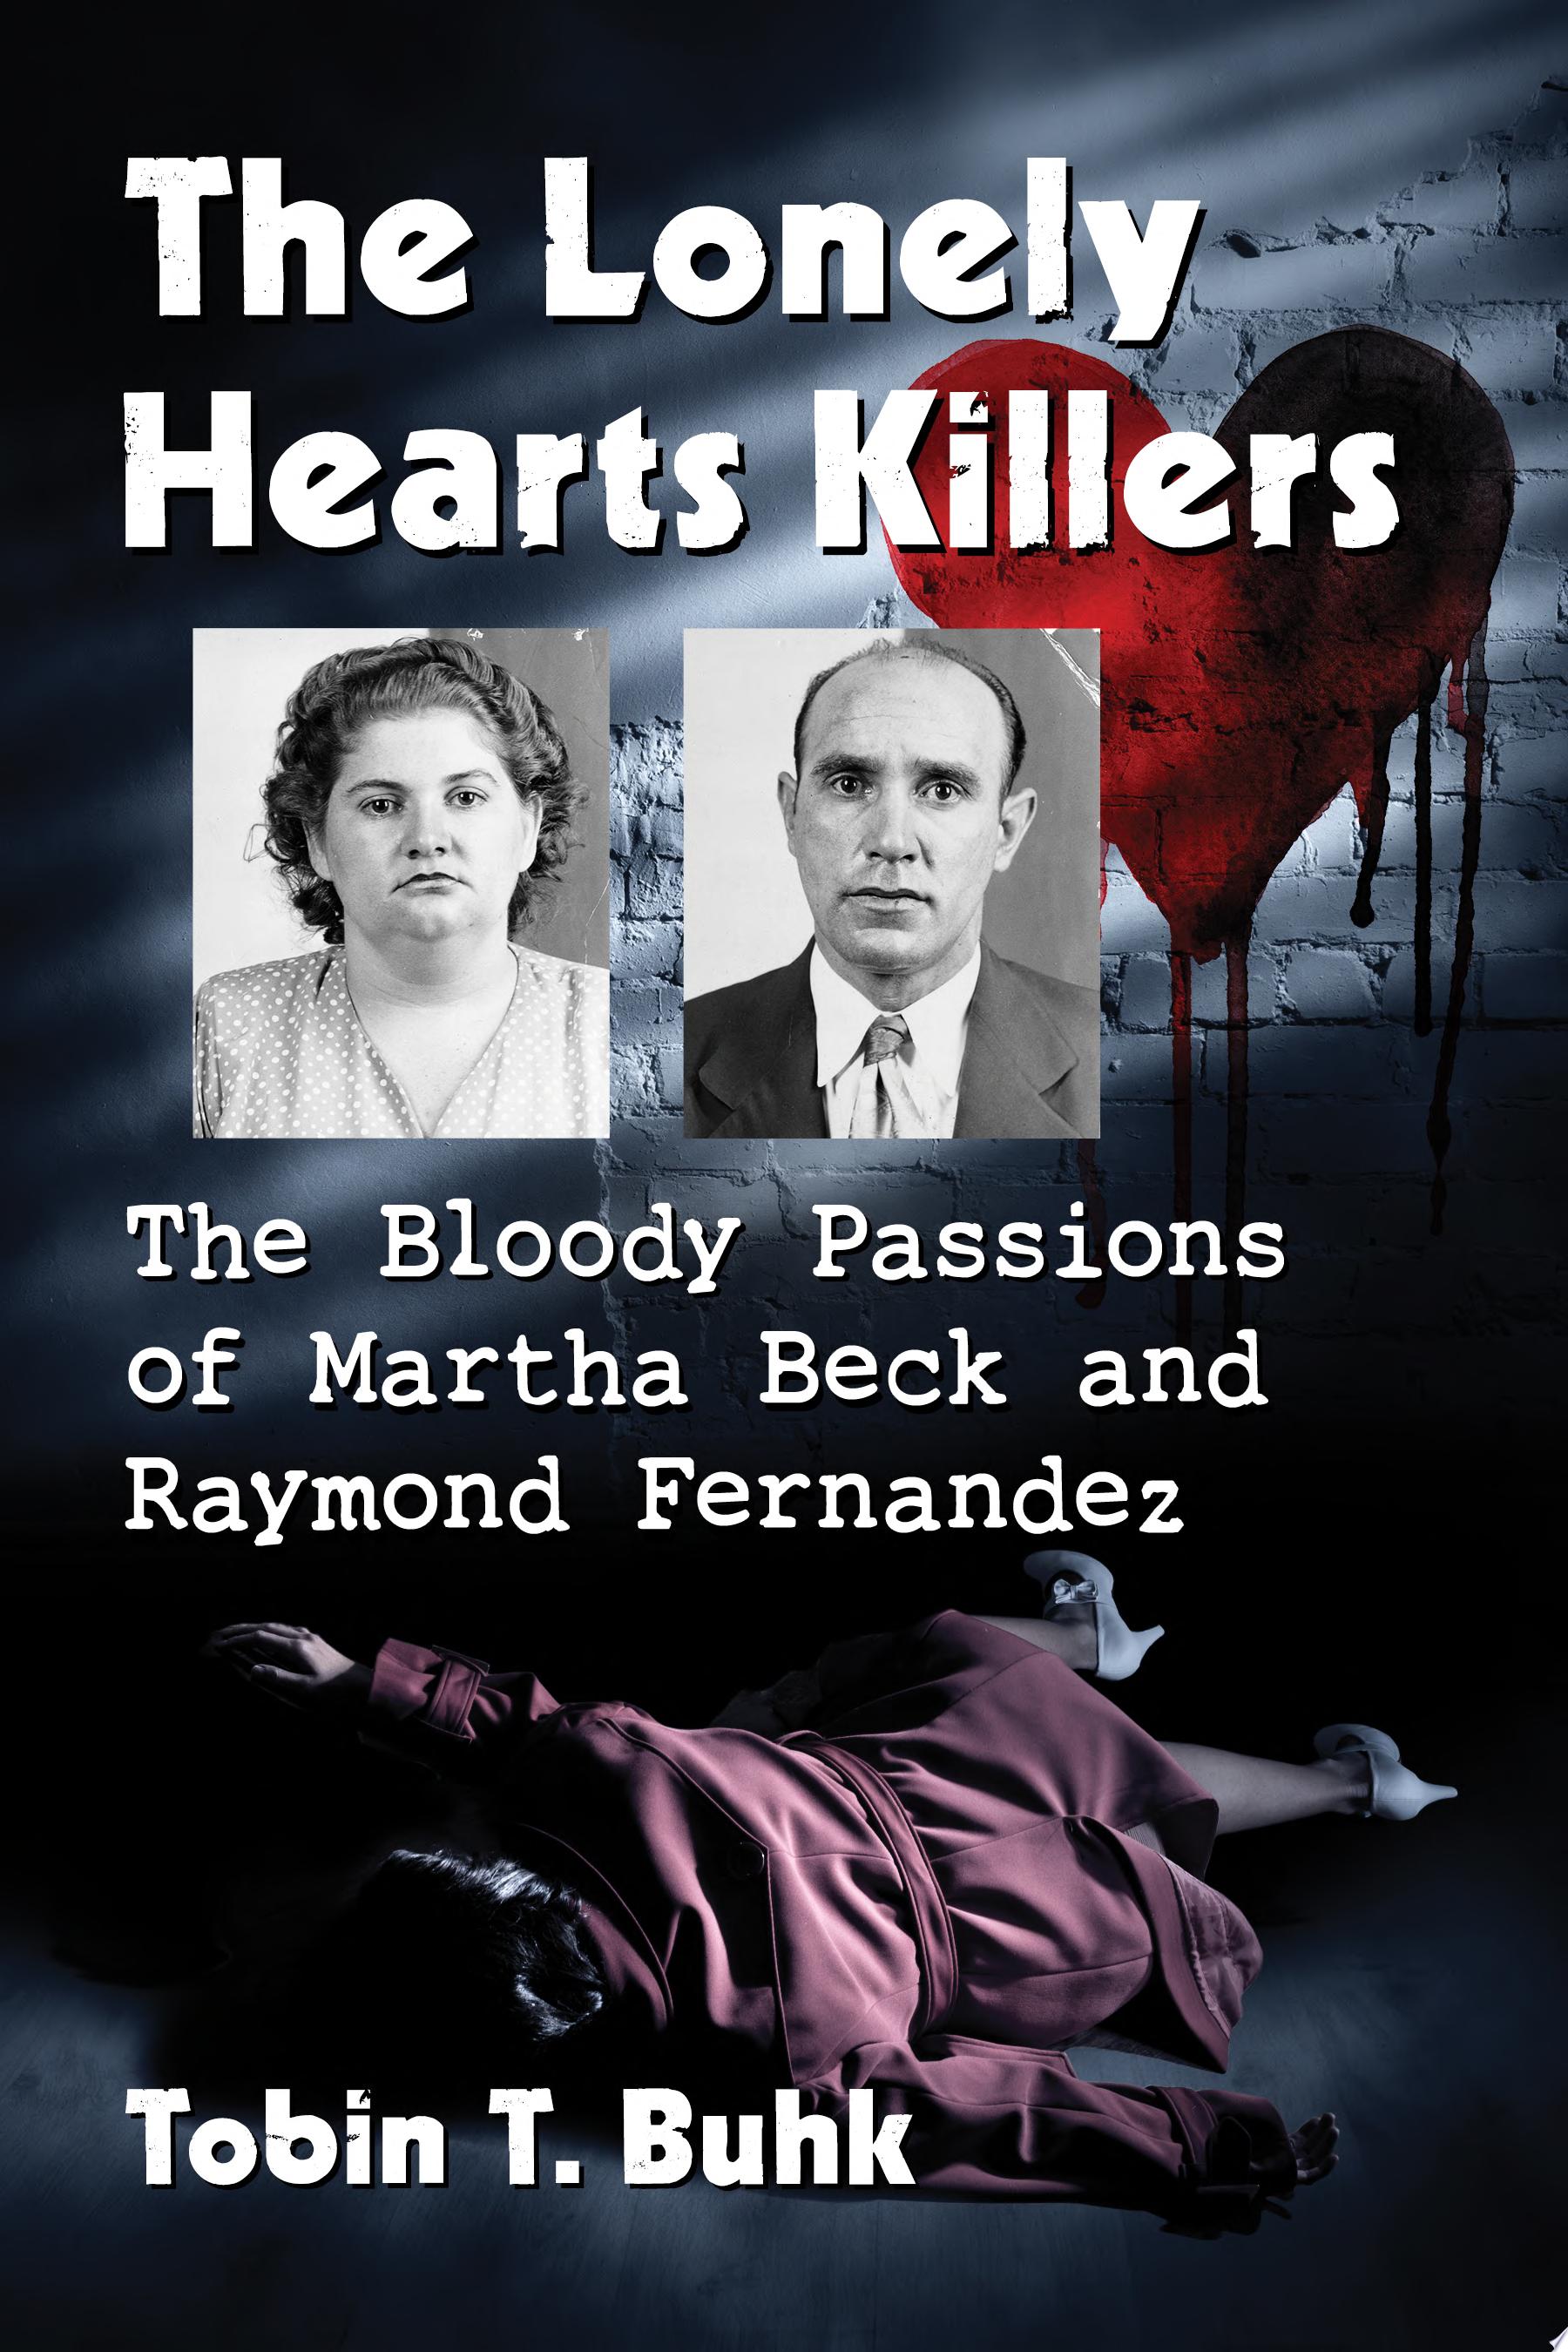 Image for "The Lonely Hearts Killers"